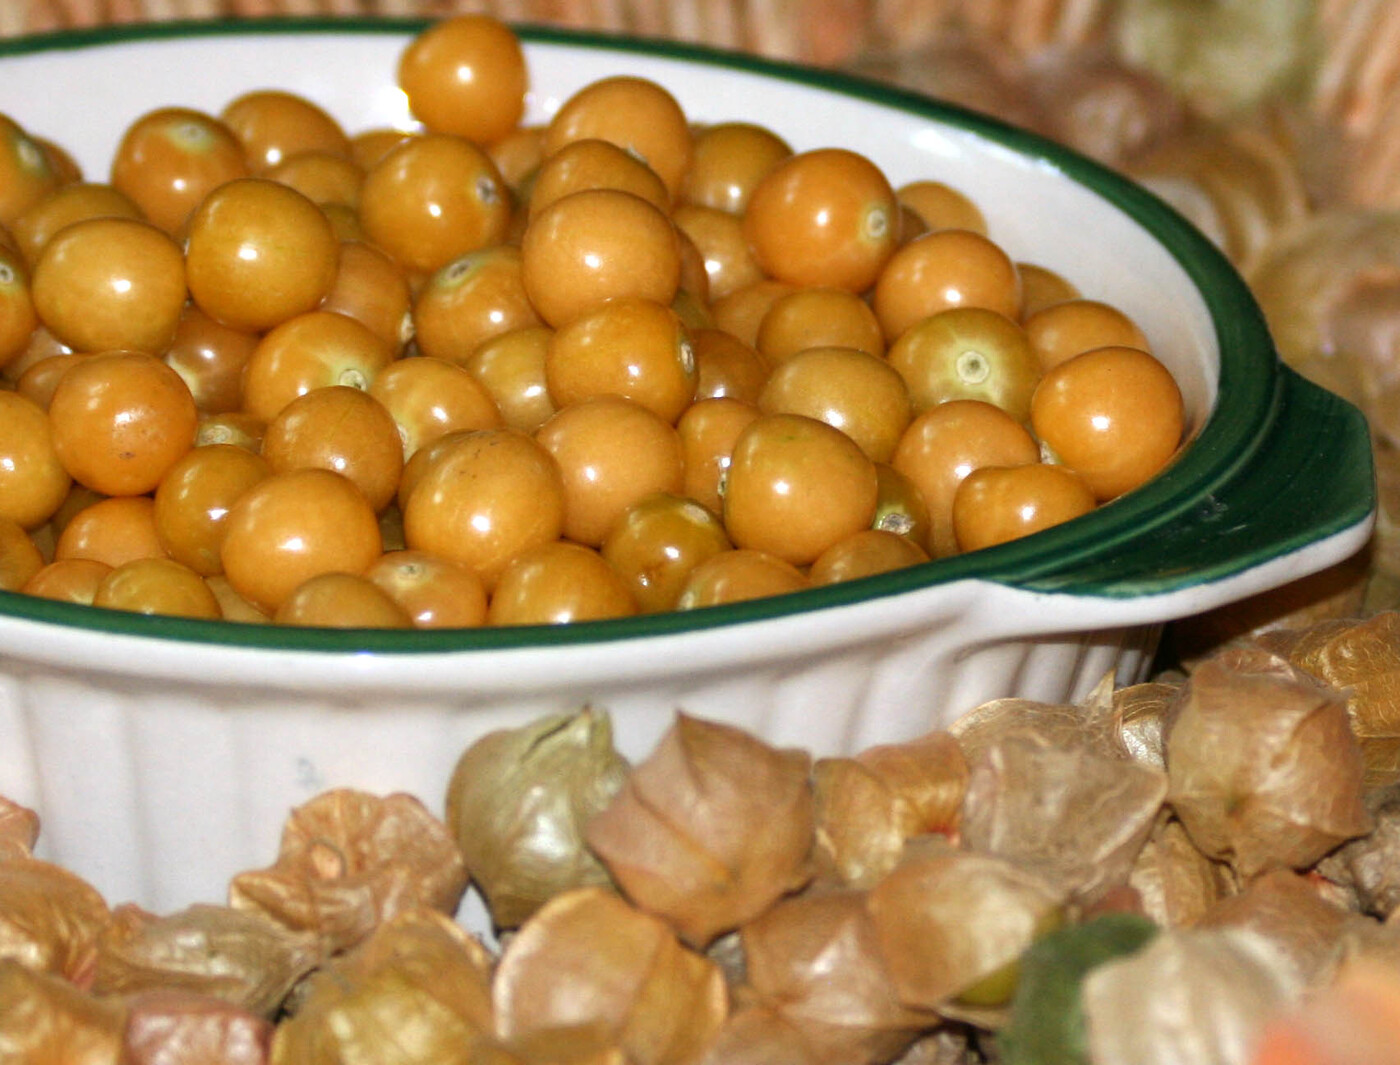 Who shouldn't eat ground cherries?